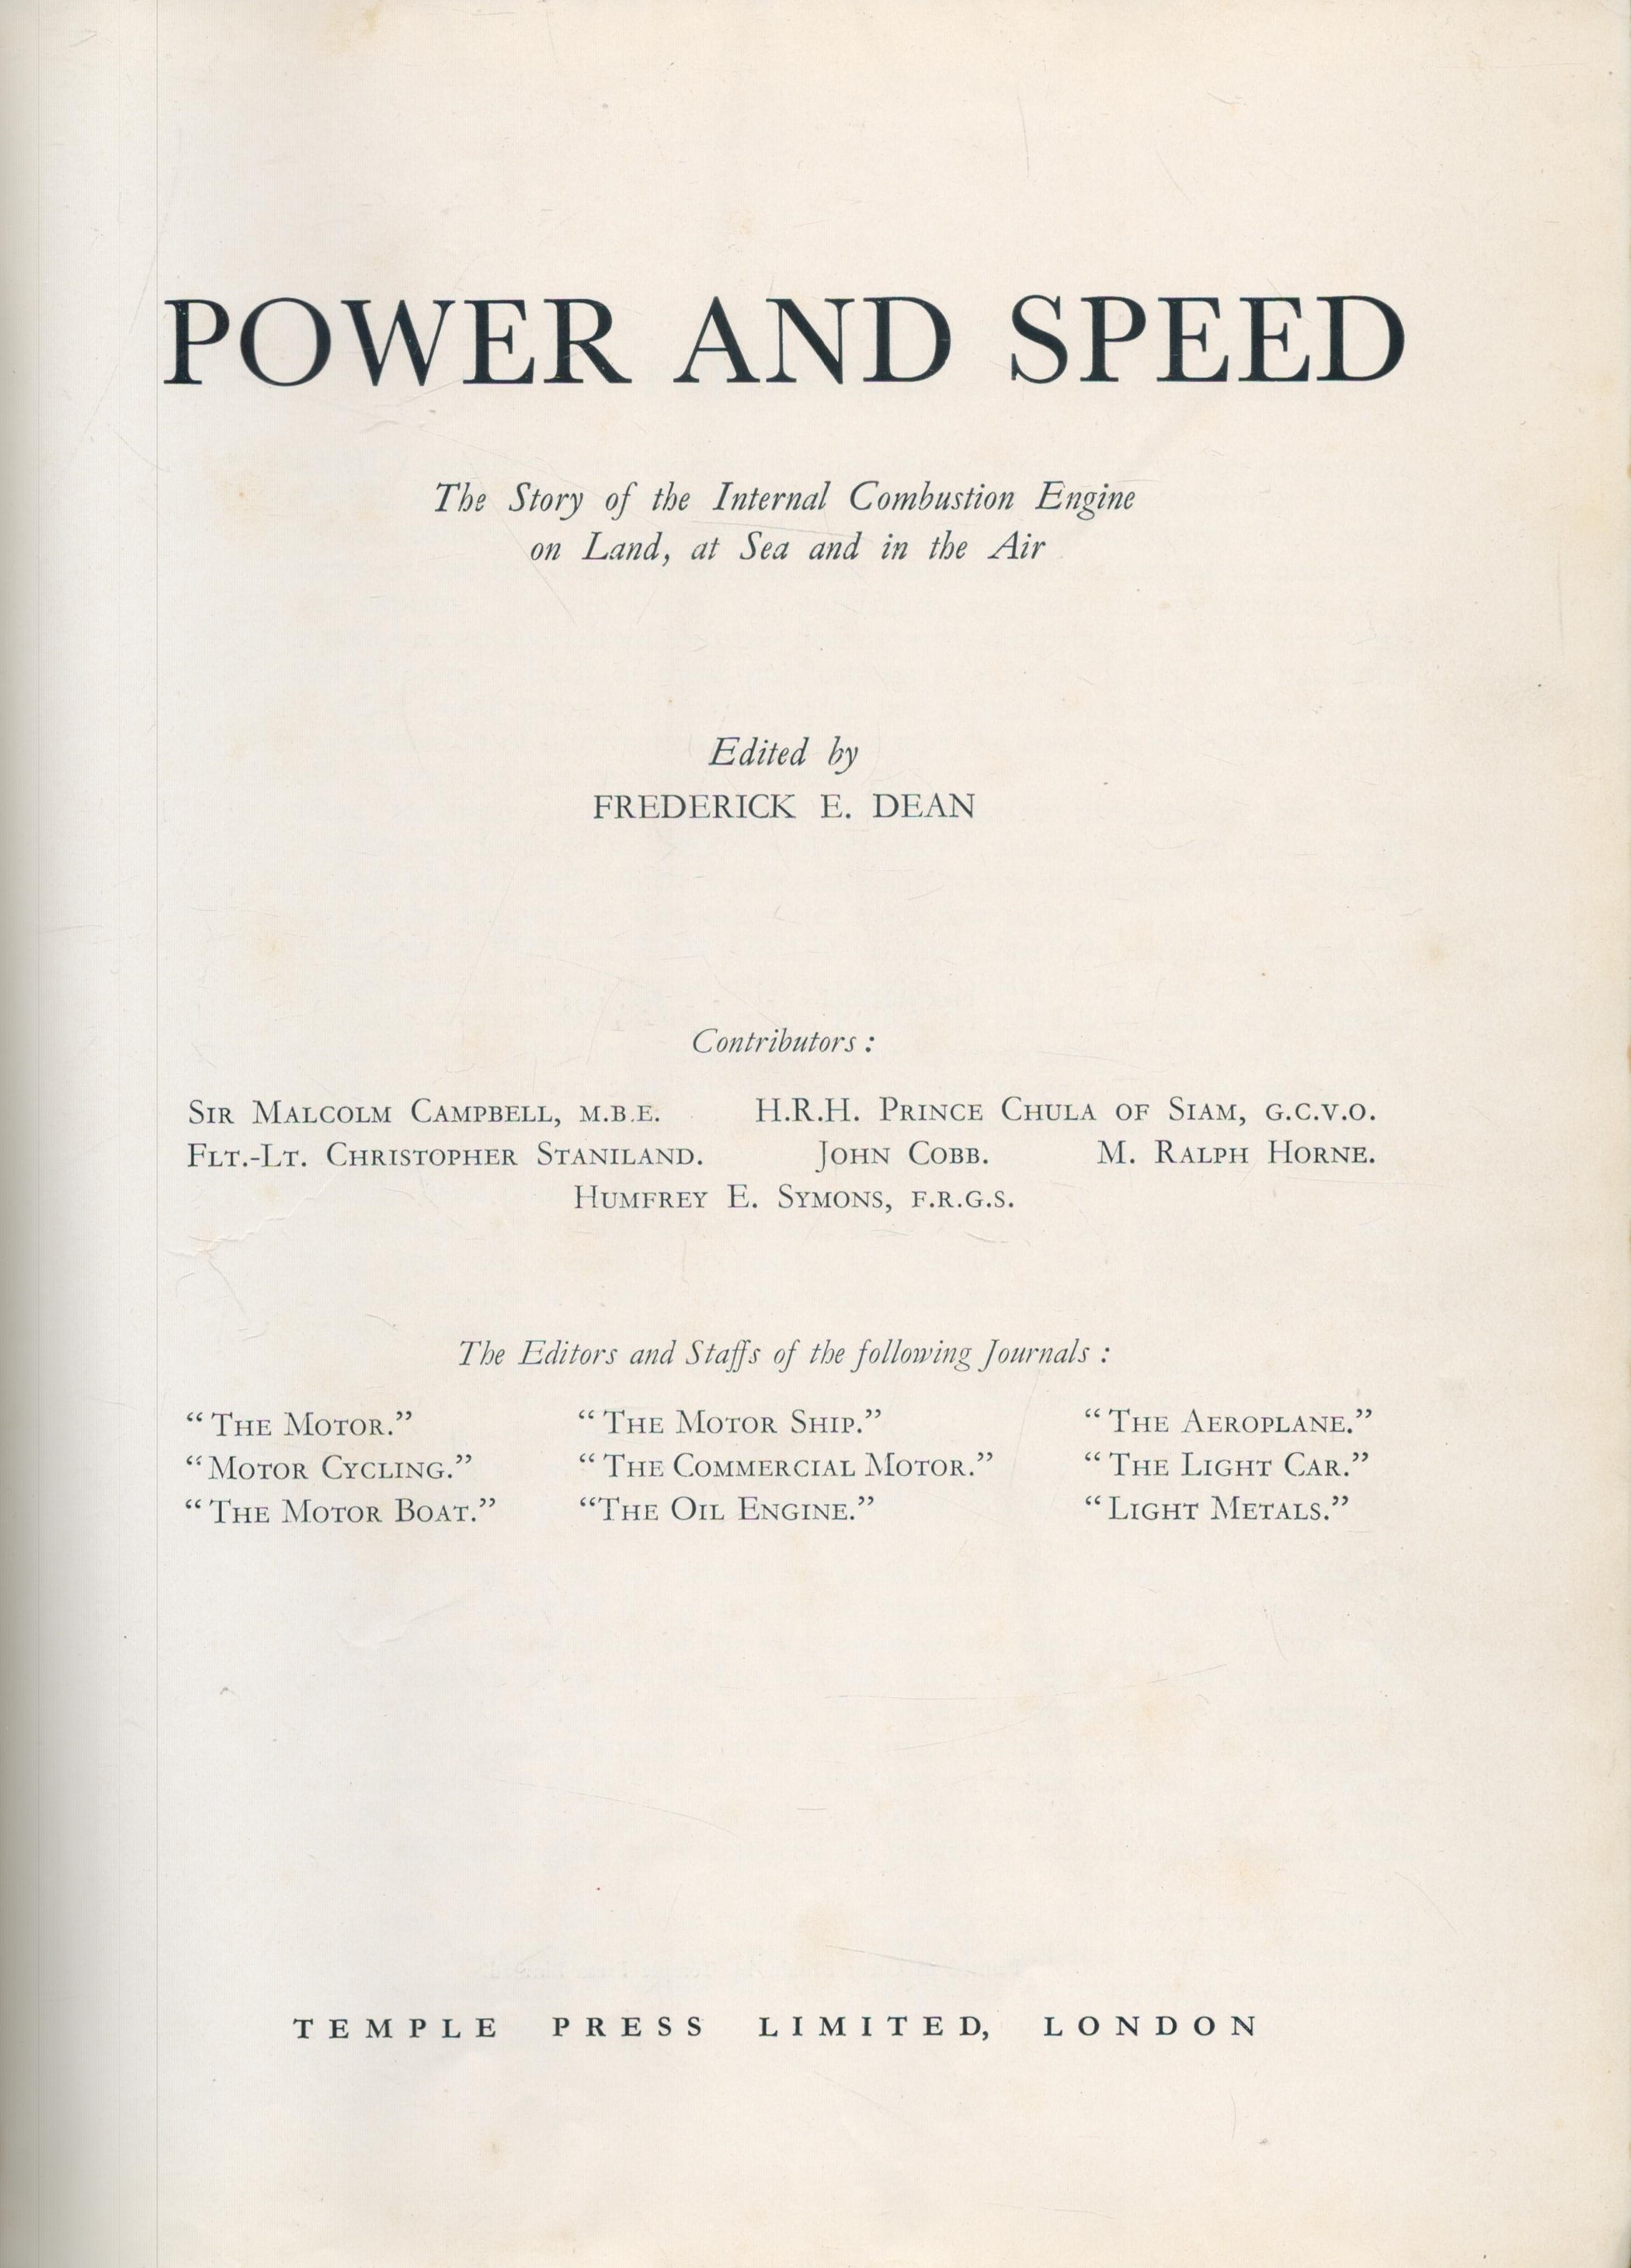 Power and Speed - The Story of the Internal Combustion Engine on Land, at Sea and in the Air - Image 6 of 9